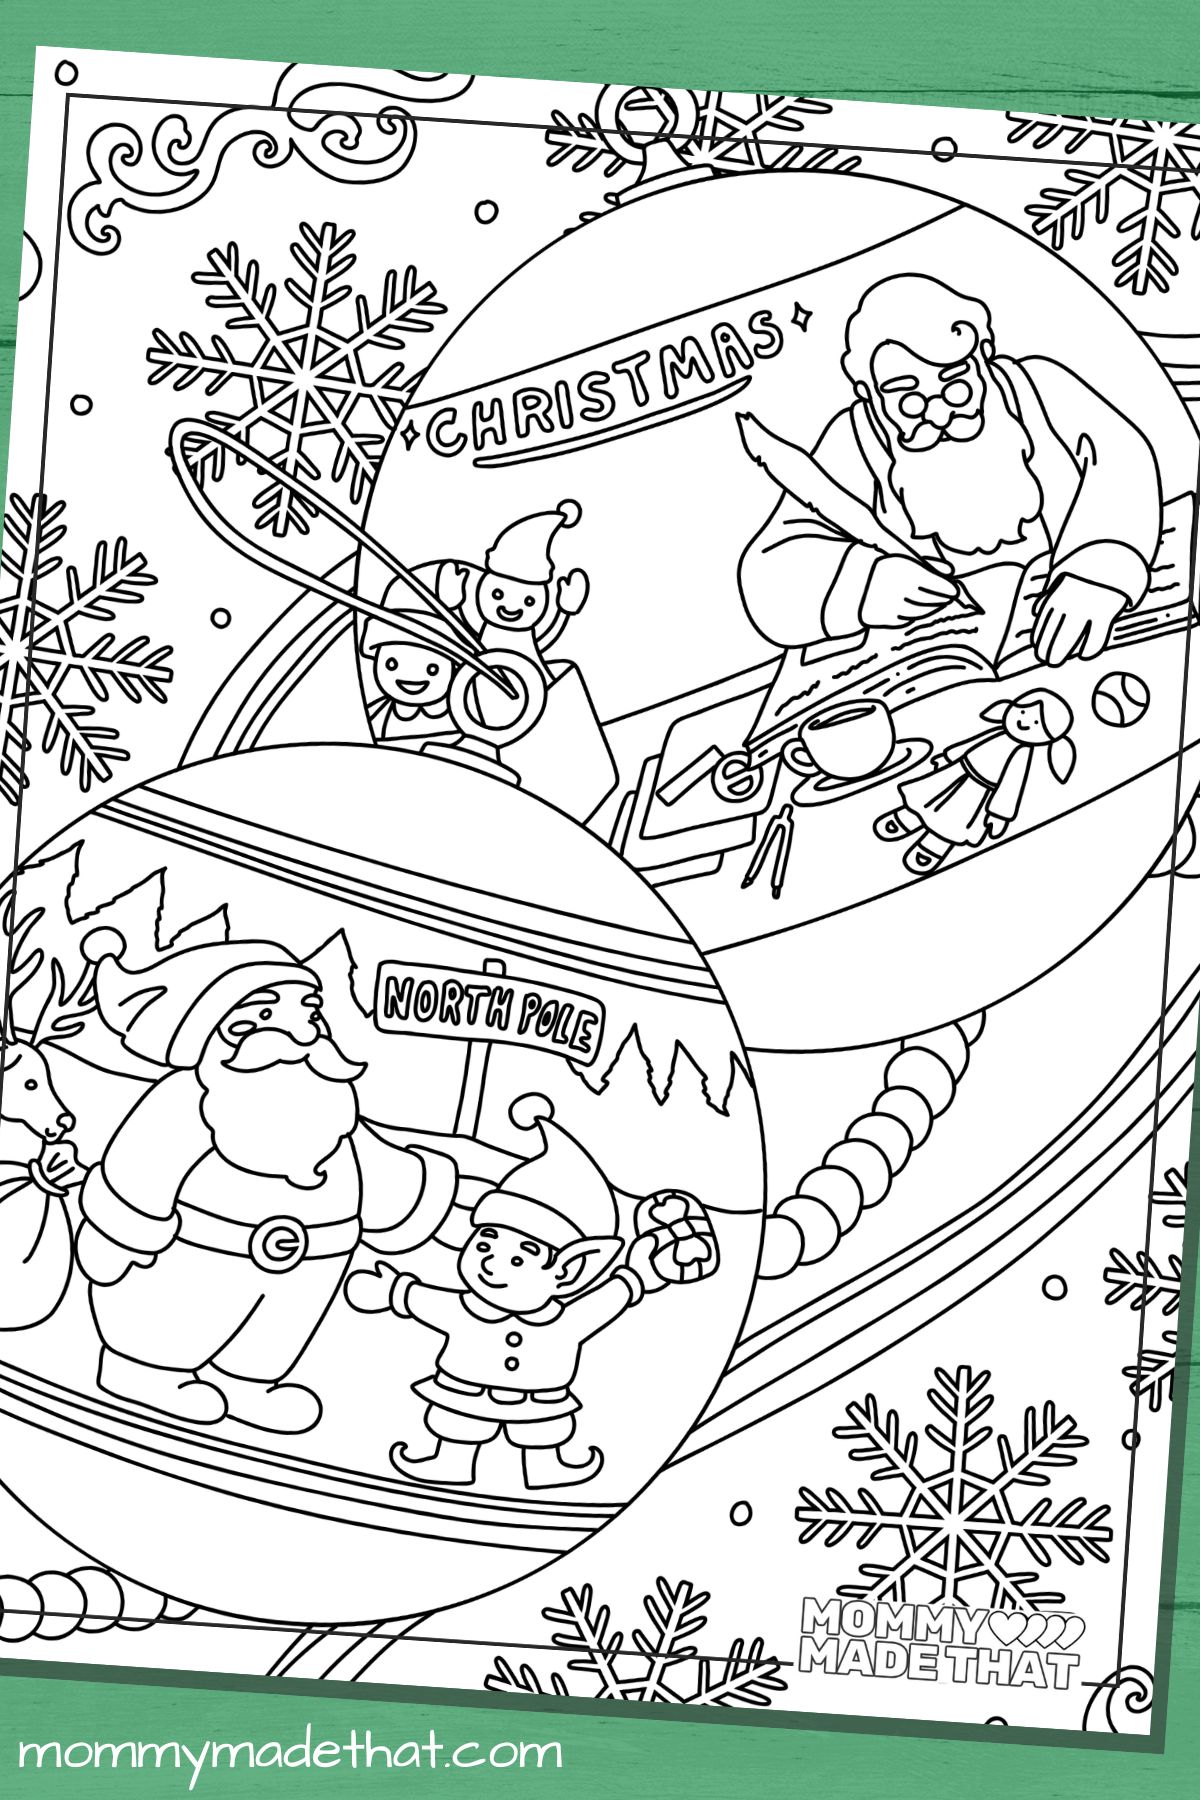 Old fashioned Christmas ornament coloring page